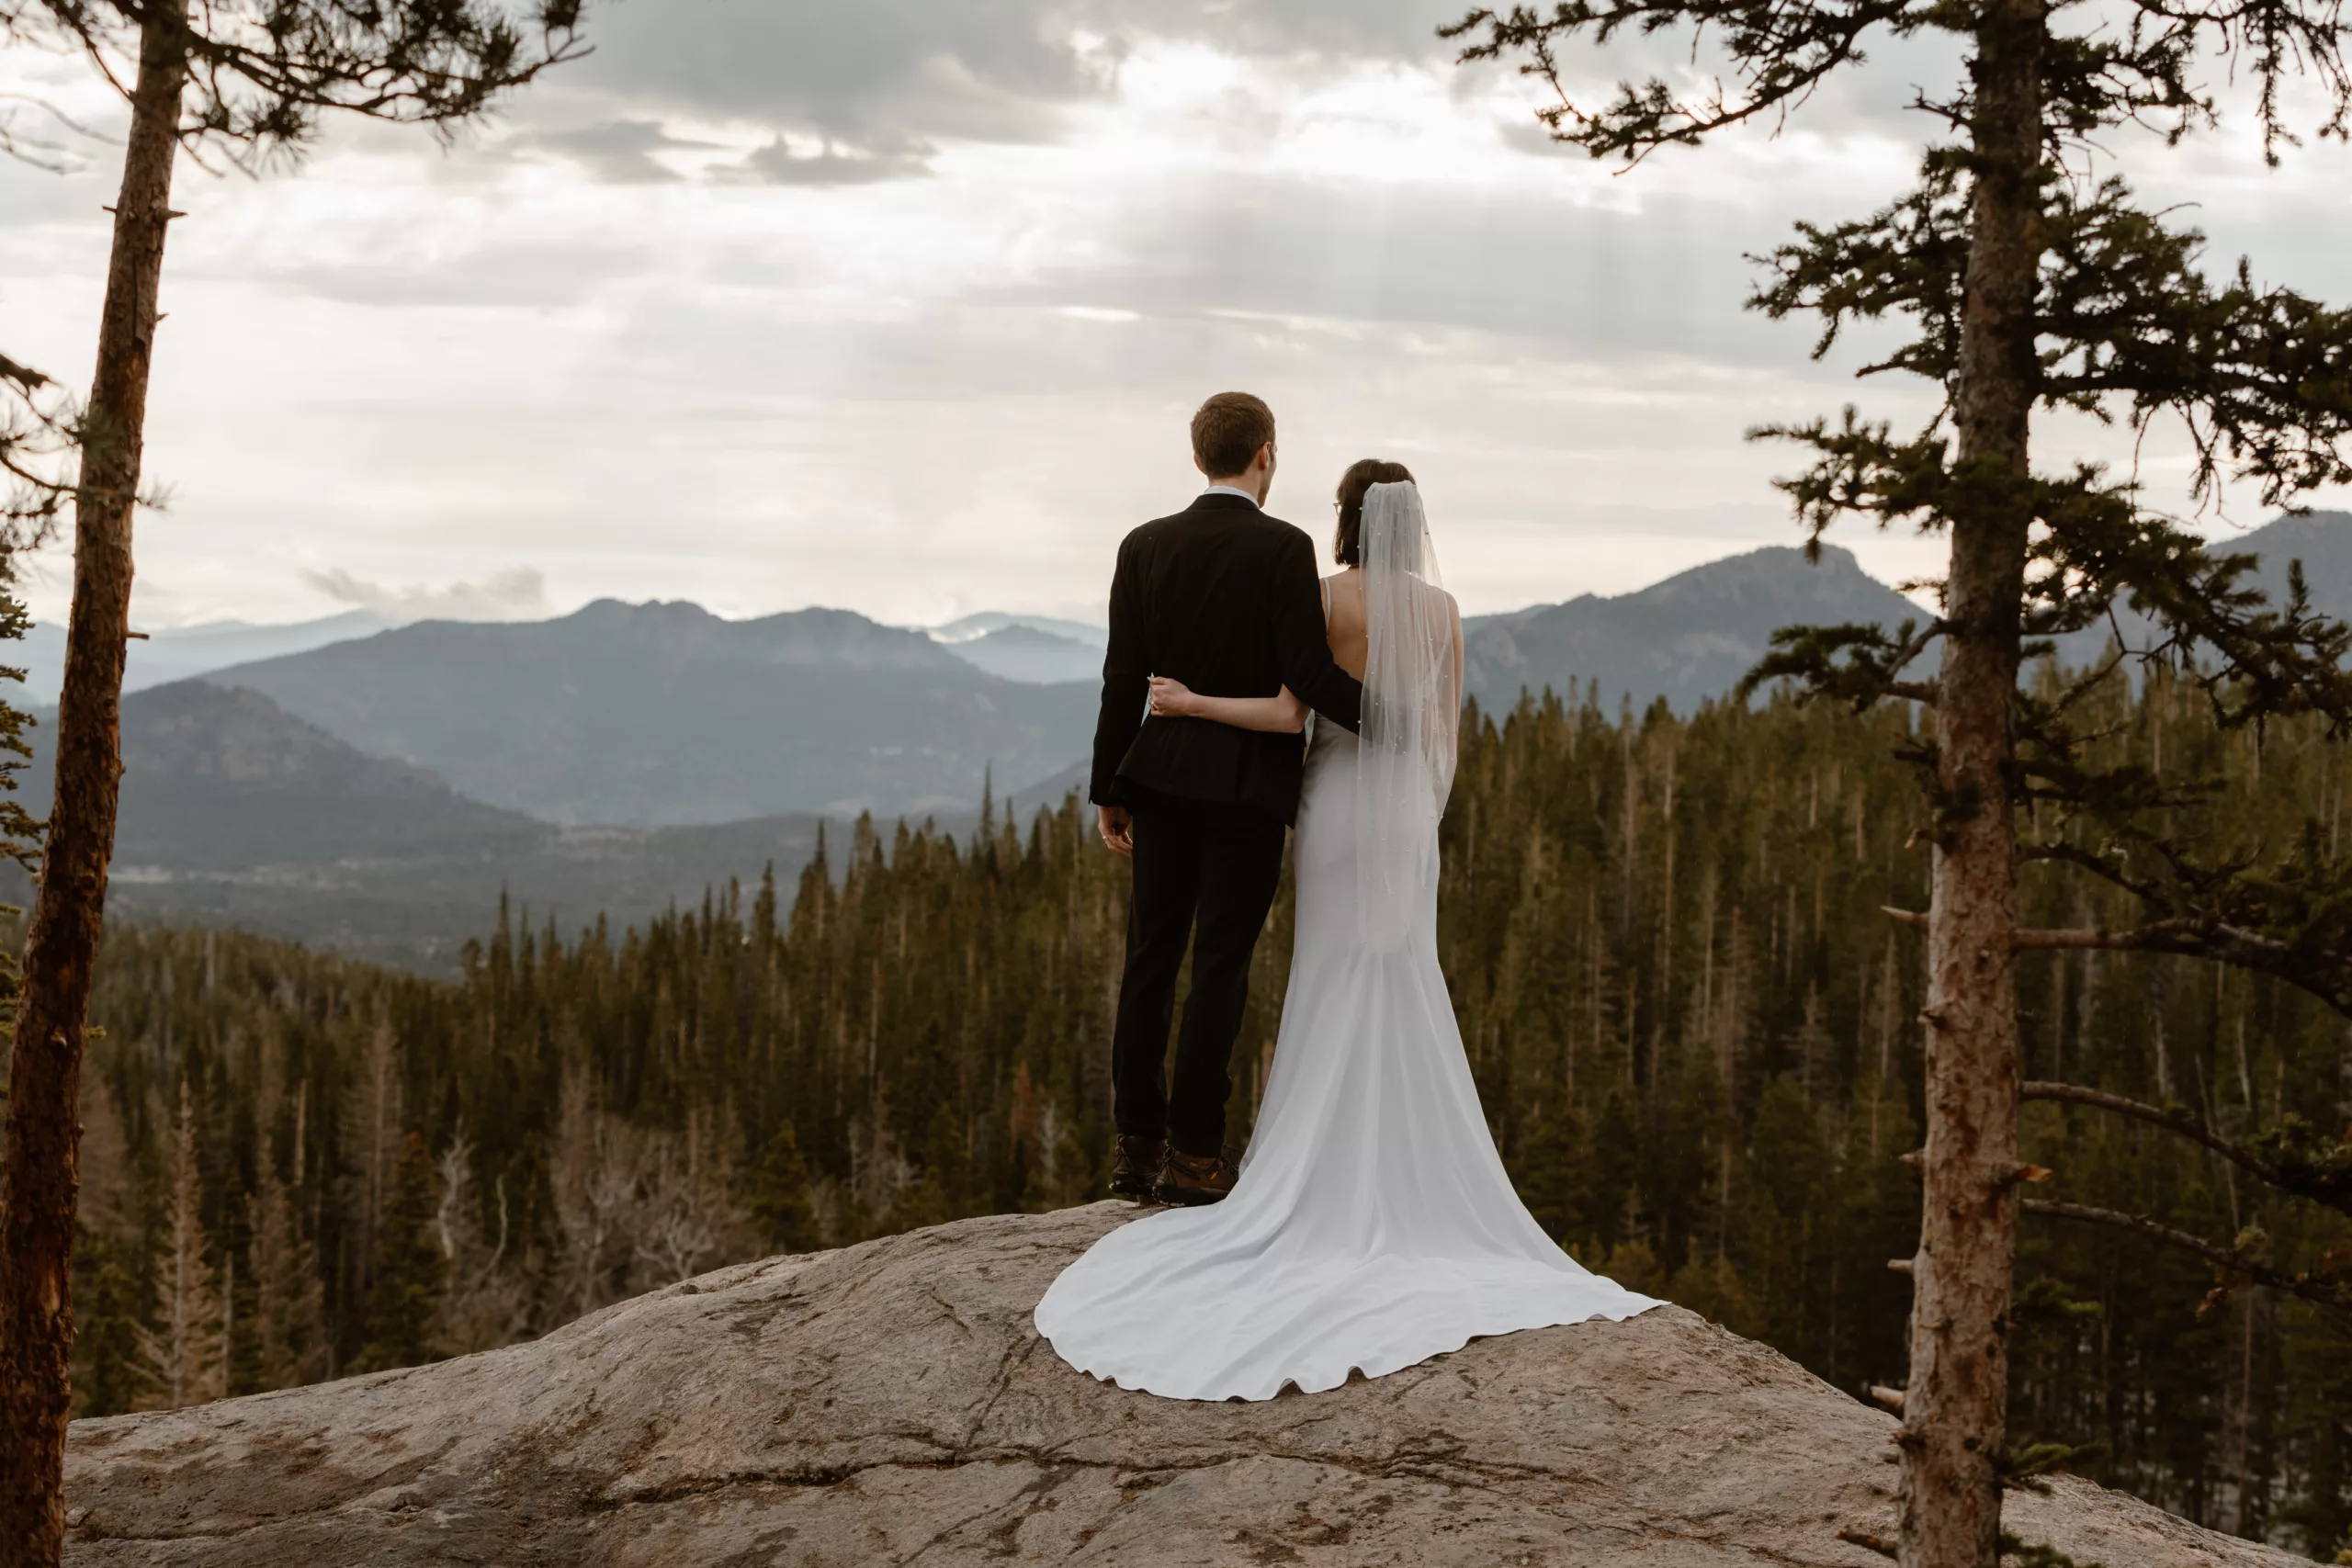 A couple enjoys their adventure elopement in Colorado, never stressing about the extra time spent because they booked extra coverage for their elopement day.